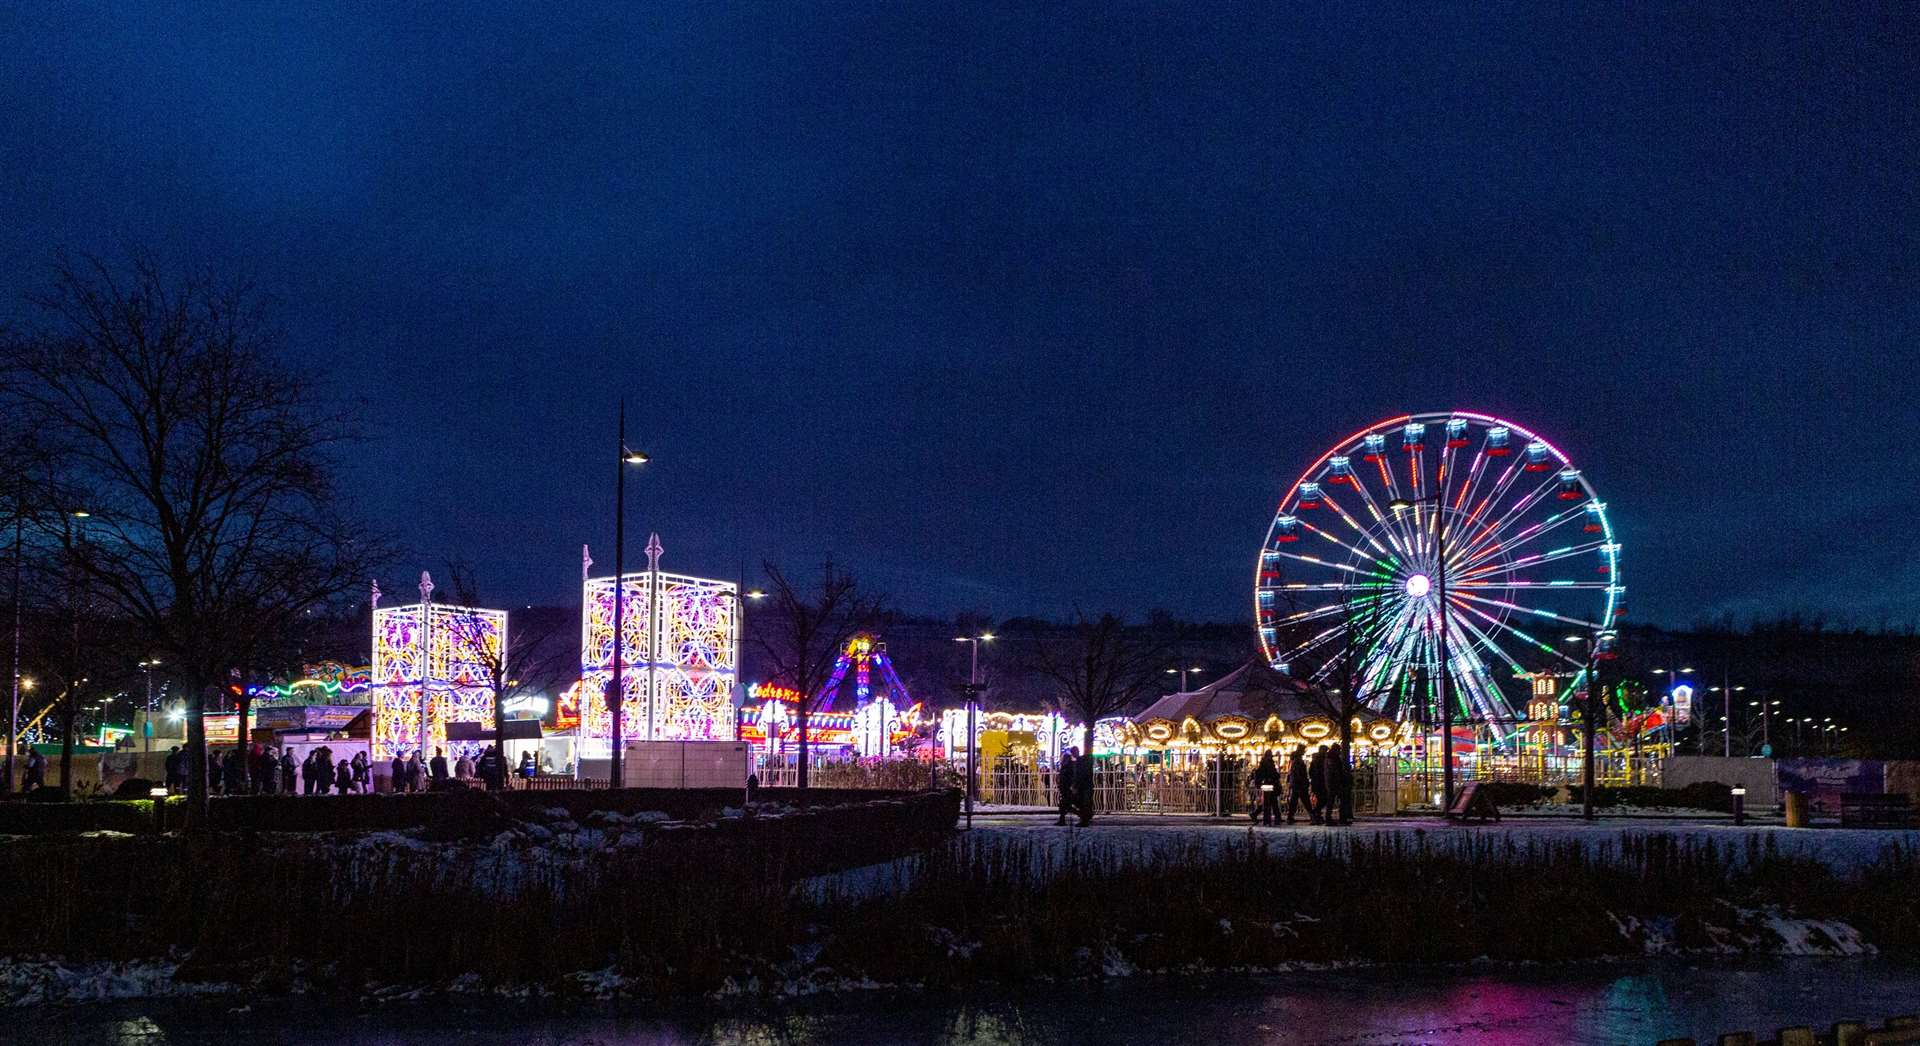 The fairground, food stalls and festive market will take over Bluewater for this year’s Winterland. Picture: UMPF